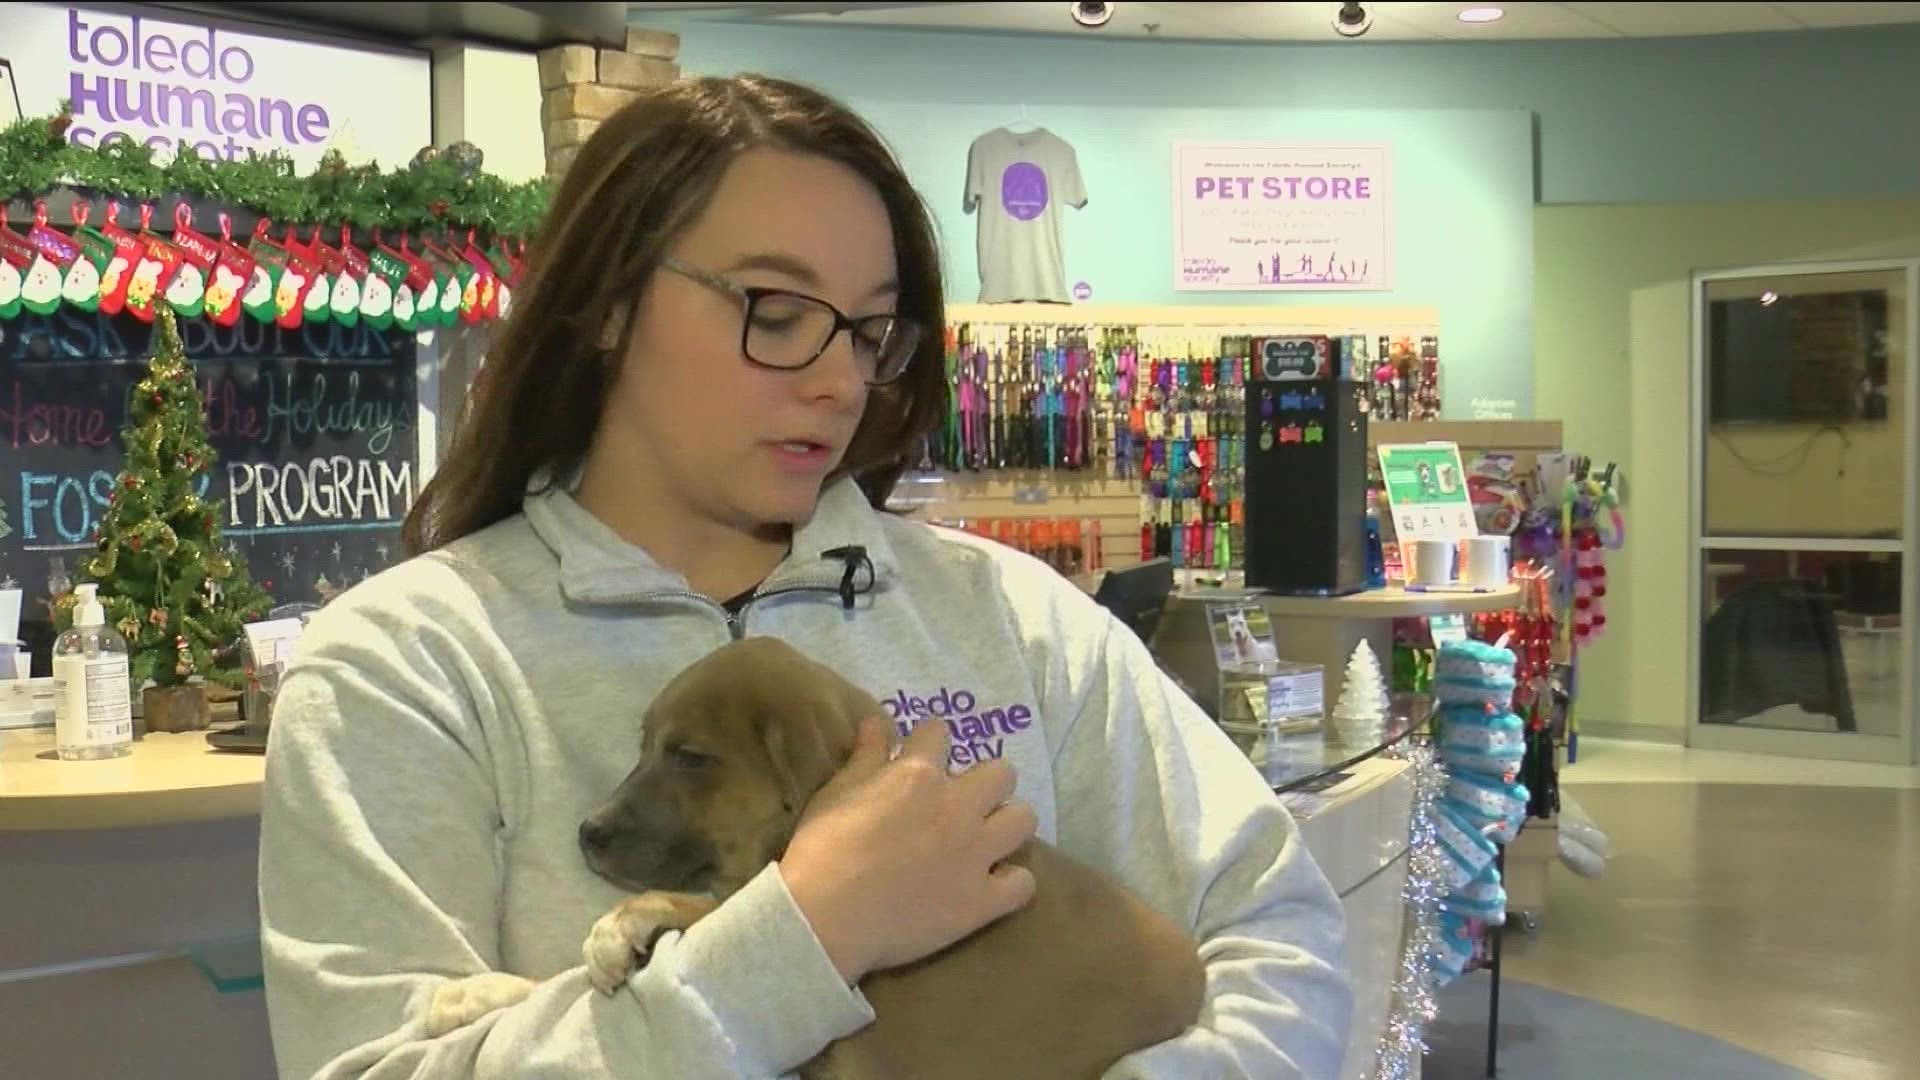 The humane society hosted an event to microchip pets for local owners.